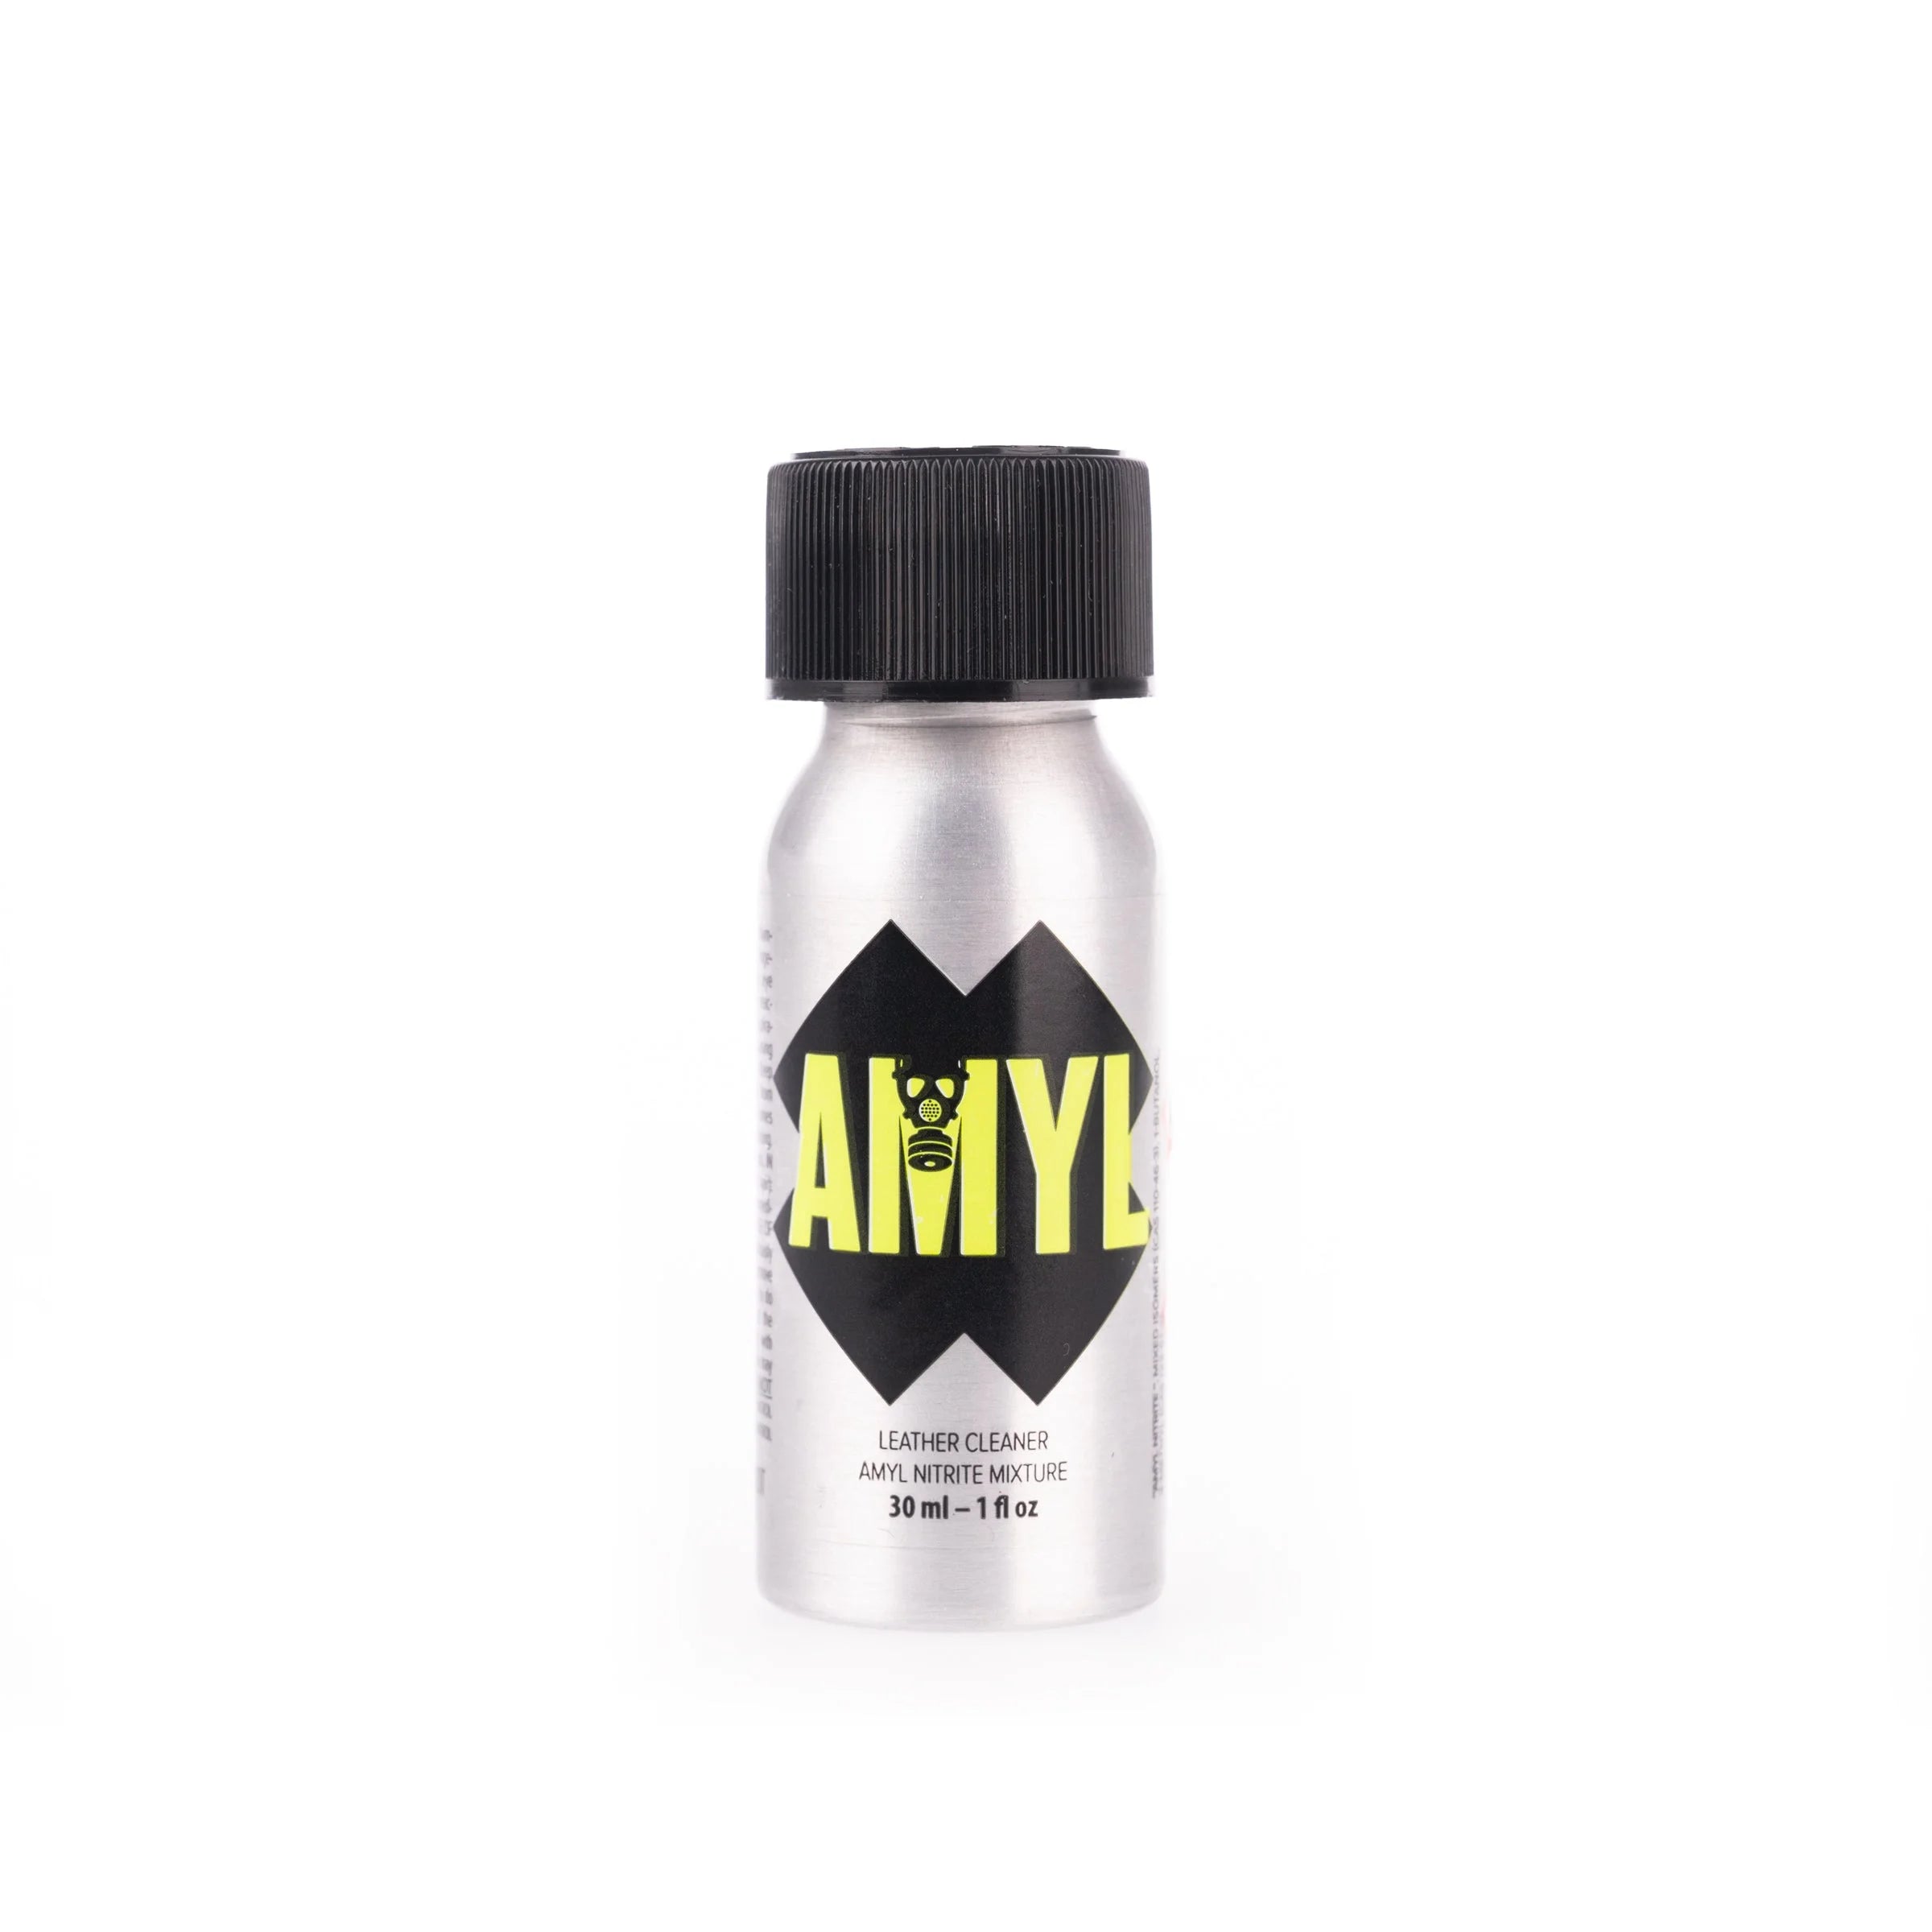 A product photo showing a metal amyl poppers bottle.